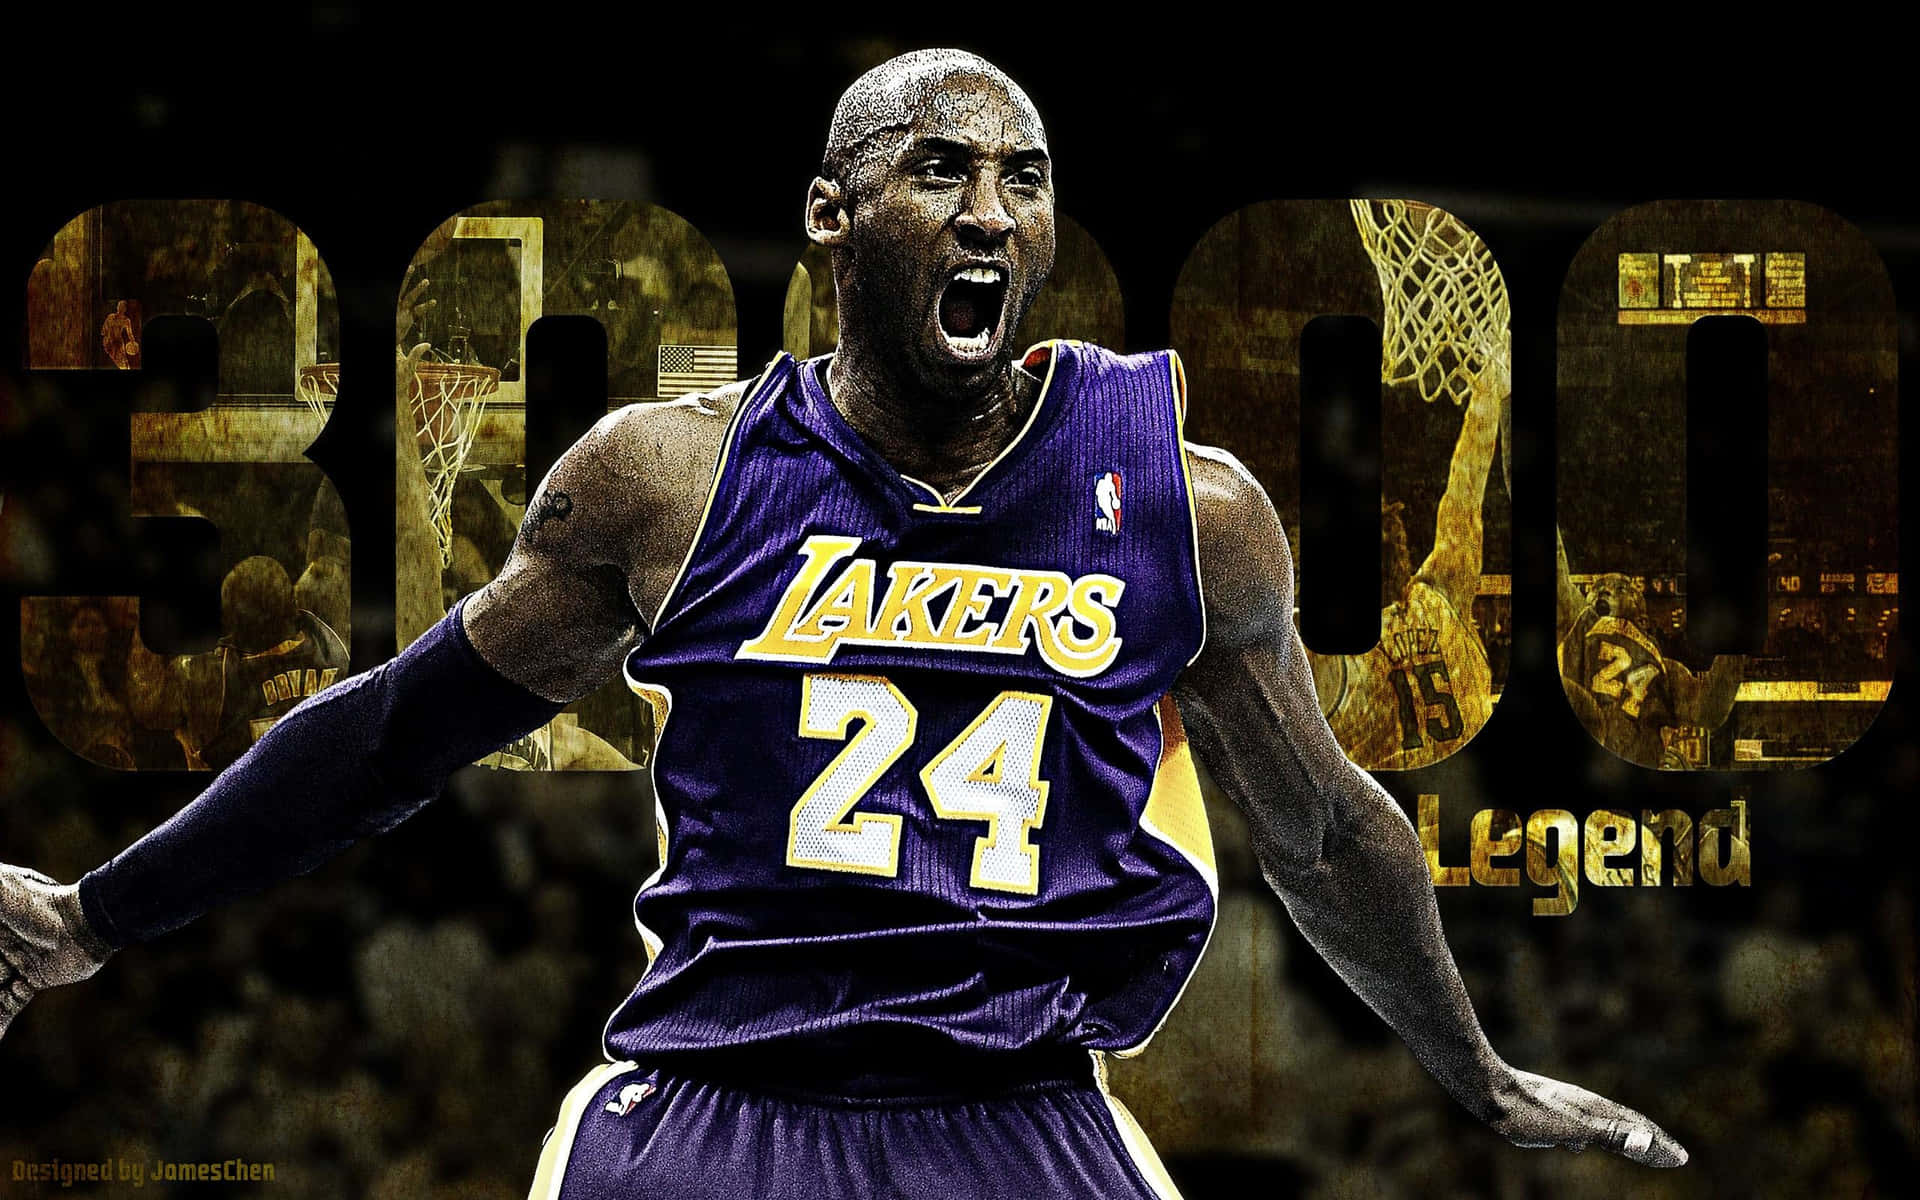 Download<ref> Legendary Los Angeles Laker Kobe Bryant</ref><box>(4,34),(884,994)</box> in action on the court wallpaper - Los Angeles Lakers, Kobe Bryant